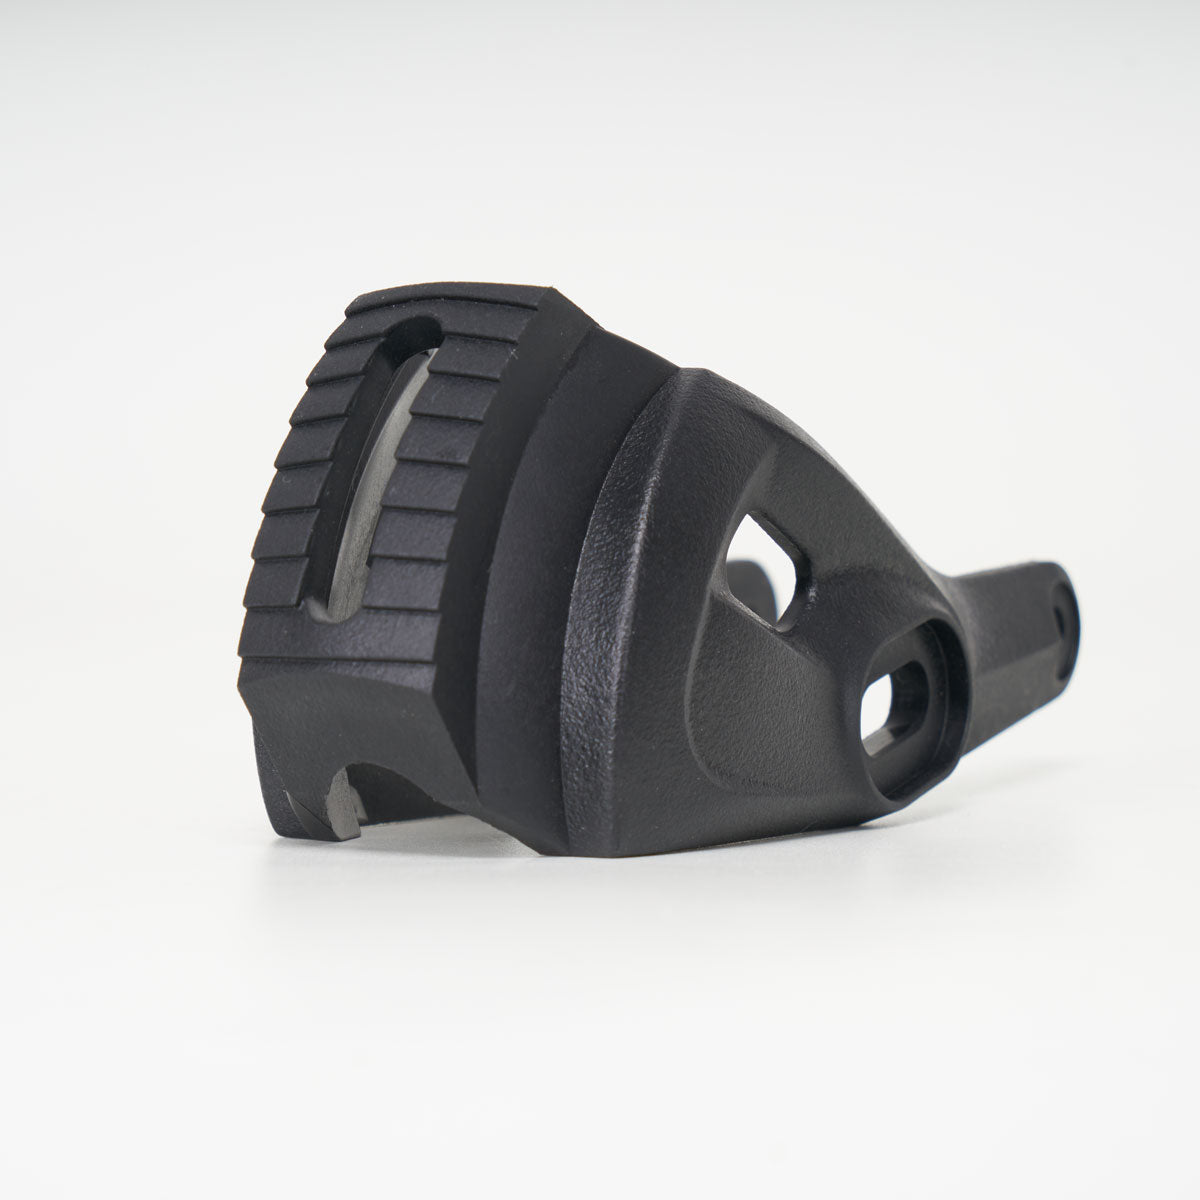 Powerslide Replacement Habs Brake HOUSING ONLY - For 270mm Length TRINITY Frames or 125mm Wheels